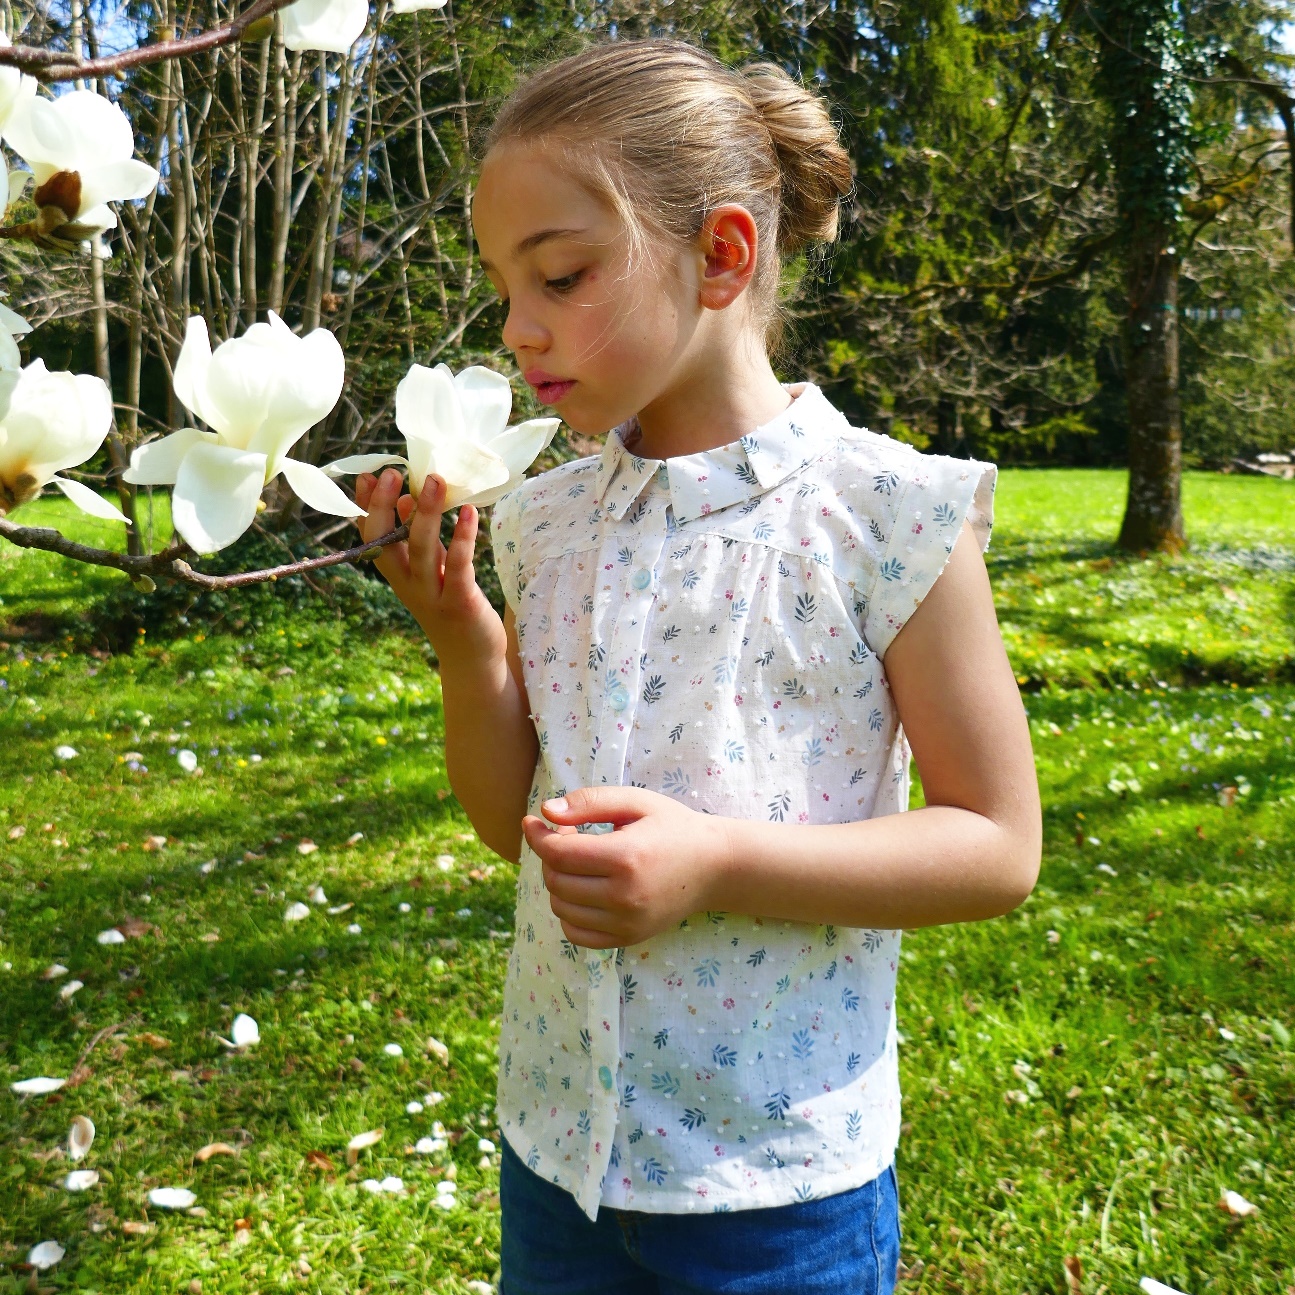 Child wearing the Dulcine Shirt sewing pattern from Petits D’om on The Fold Line. A blouse pattern made in poplin, batiste, Liberty, plumetis, cotton satin, tencel, viscose or double gauze fabrics, featuring a front yoke with gathers, cap sleeves, front button placket and double pointed collar.